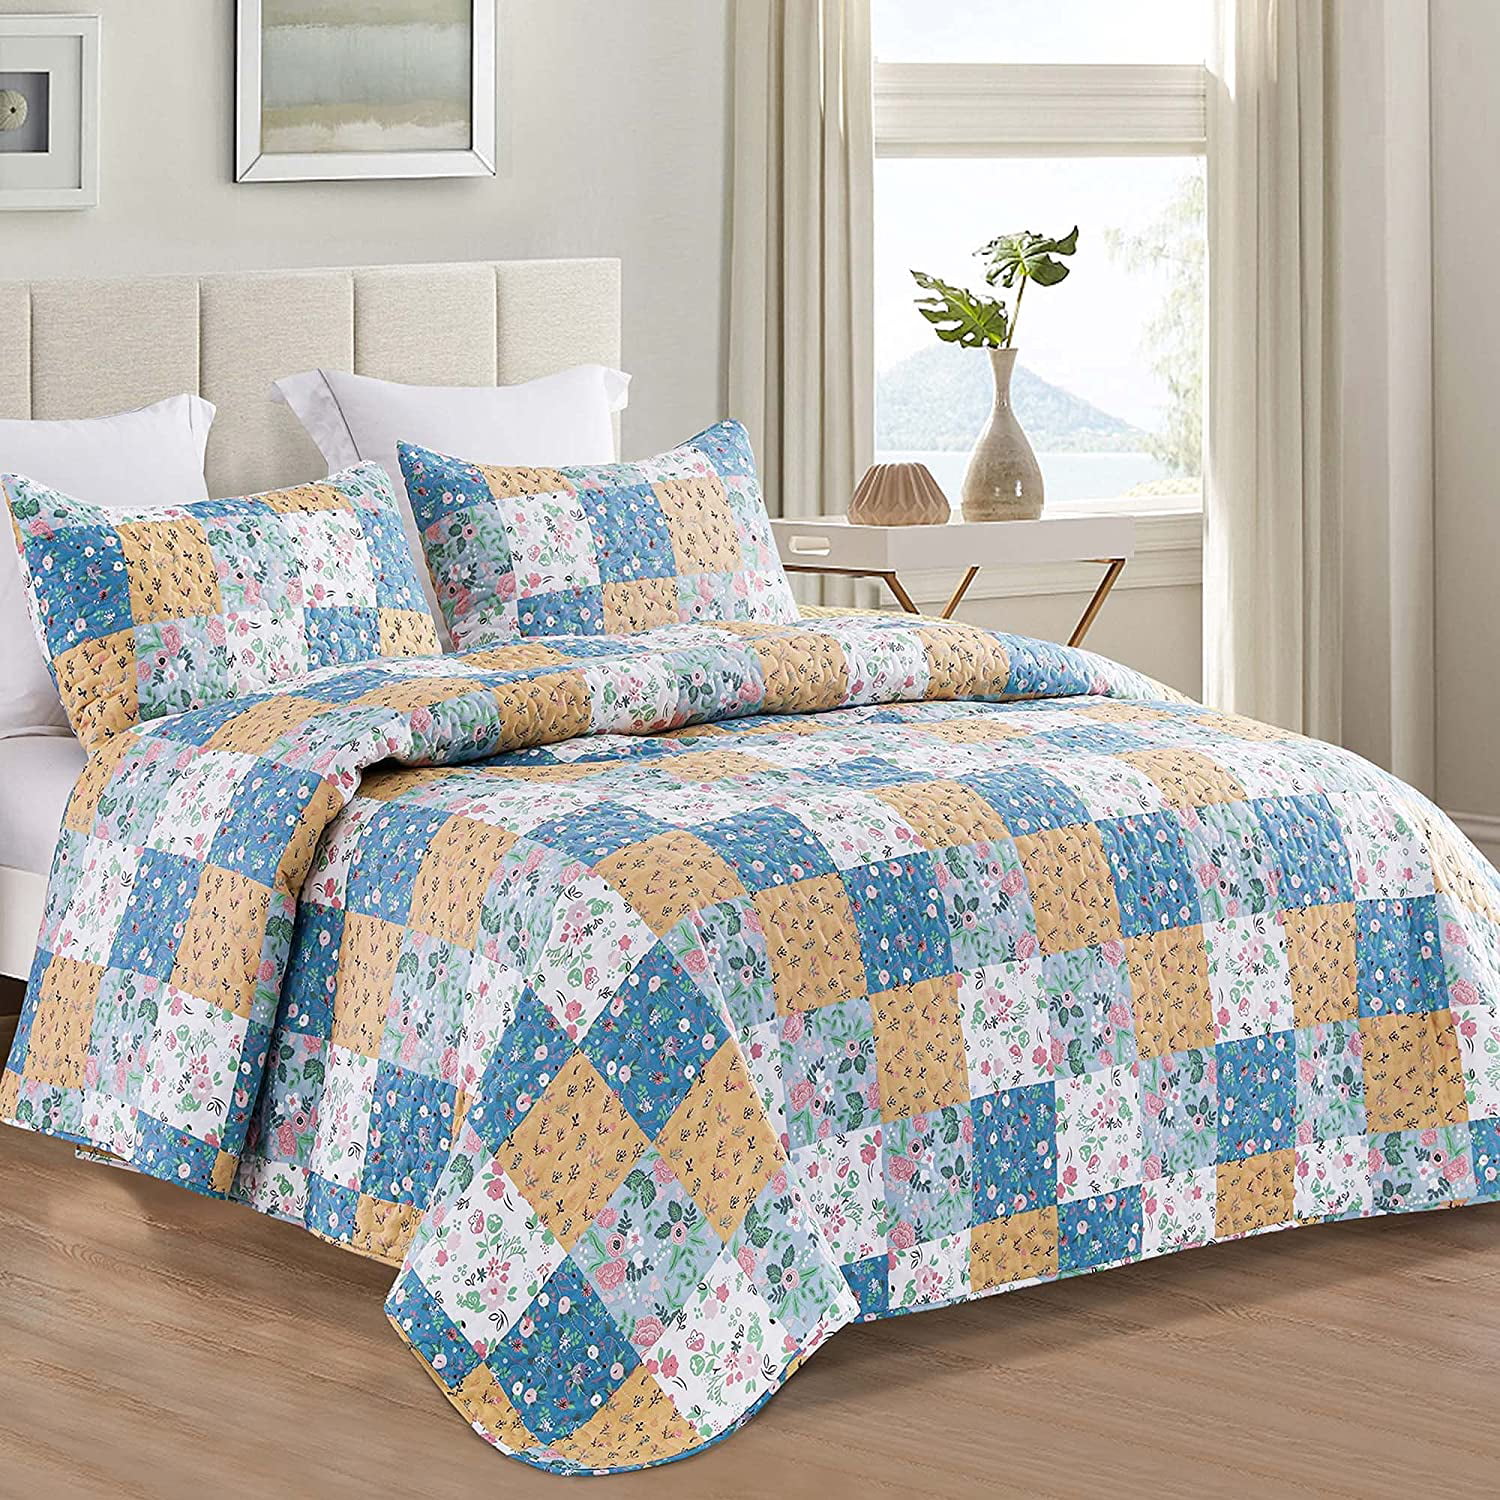 Details about   Green Hand Block Floral Printed Sheet Queen Bed Cover Cotton Bedding With Pillow 